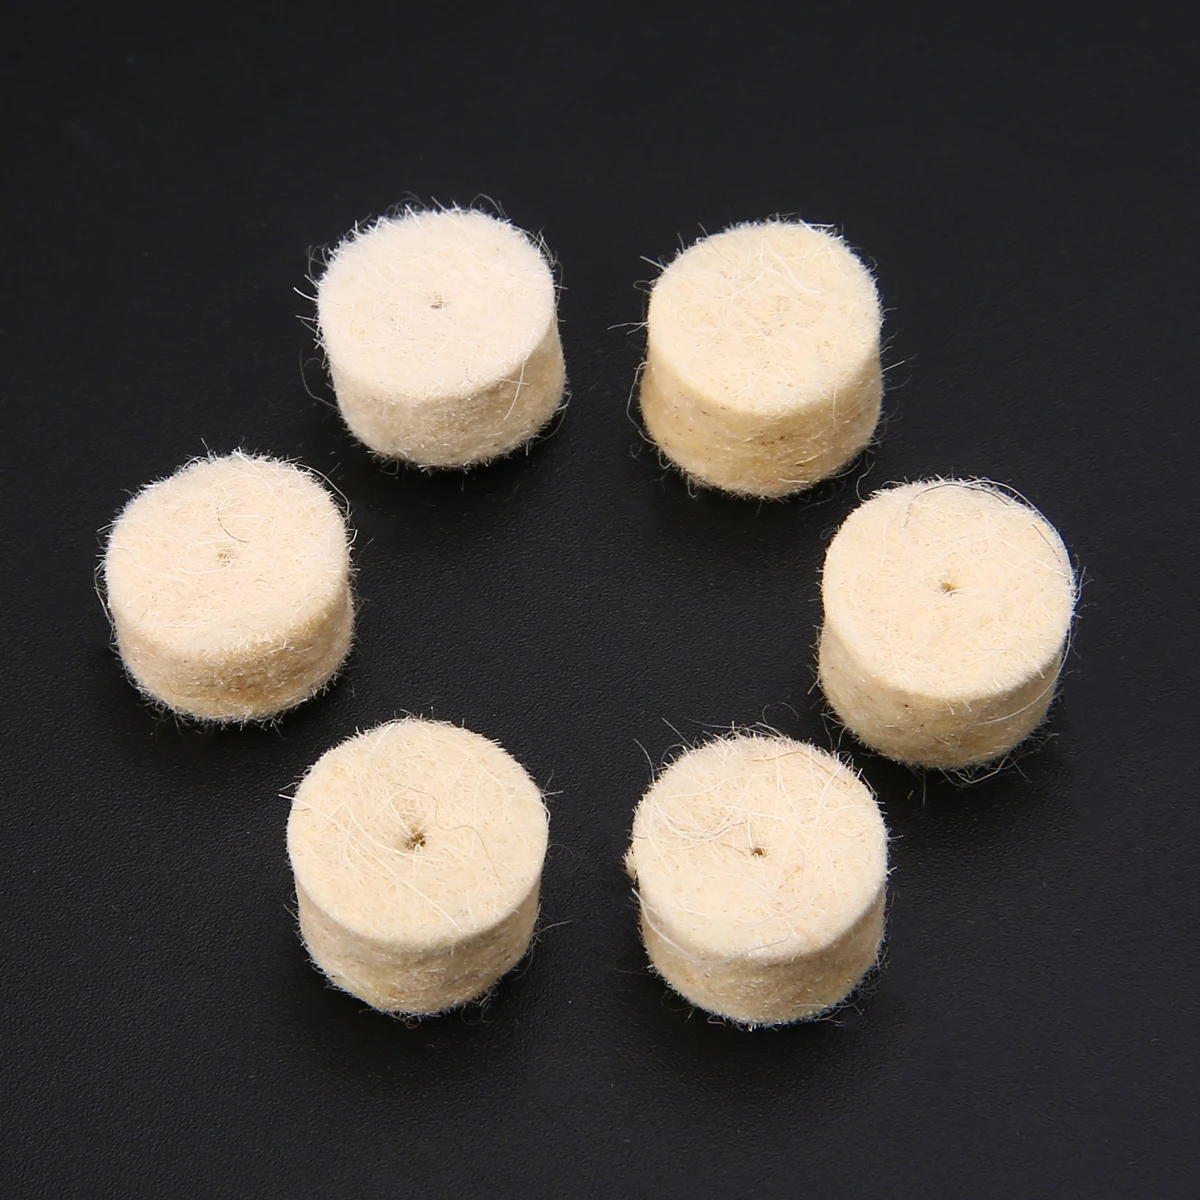 100pcs 13mm Wool Felt Polishing Buffing Wheel Buffing Pad with 2 Shanks for Grinding Wheels Abrasive Tools